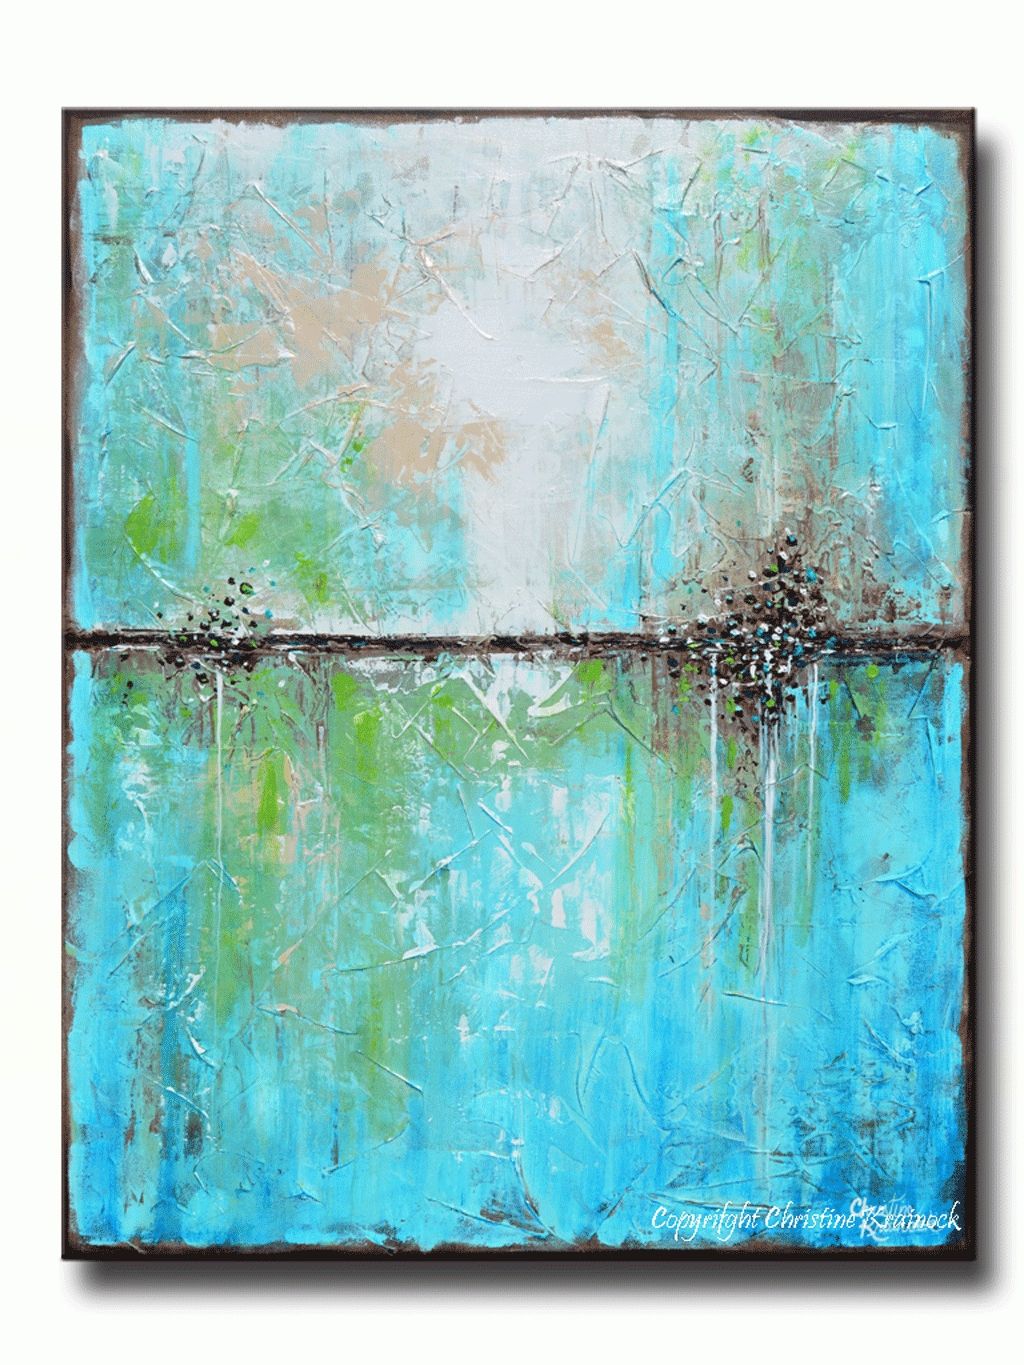 Wall Art Designs: Blue Wall Art Art Abstract Painting Aqua Blue In Newest Abstract Wall Art Prints (View 16 of 21)